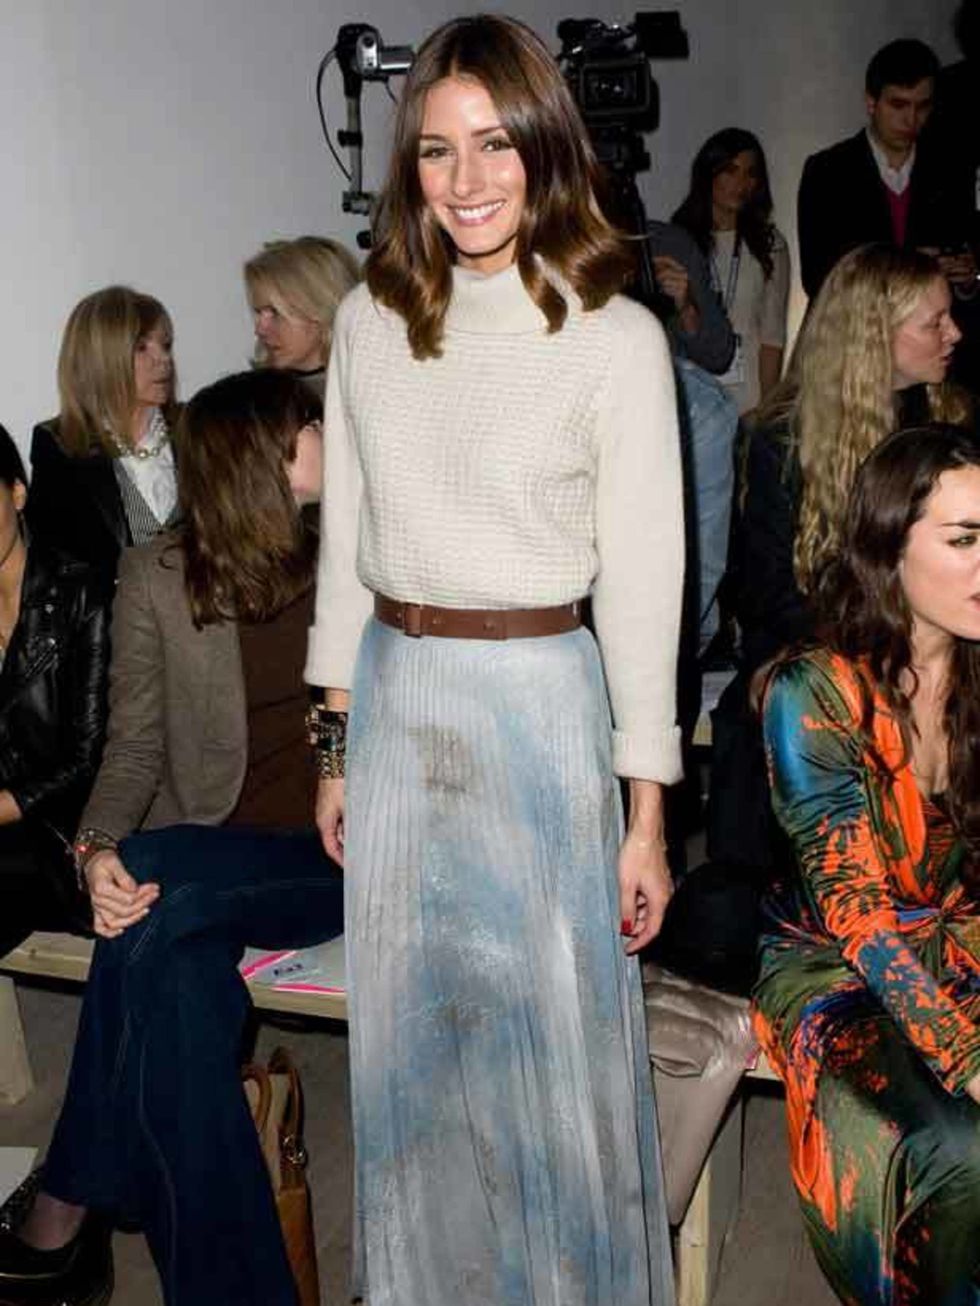 <p> <a href="http://www.elleuk.com/starstyle/style-files/%28section%29/olivia-palermo">Olivia Palermo</a> at the <a href="http://www.elleuk.com/catwalk/collections/jonathan-saunders/autumn-winter-2011/collection">Jonathan Saunders AW11</a> show, 19 Februa